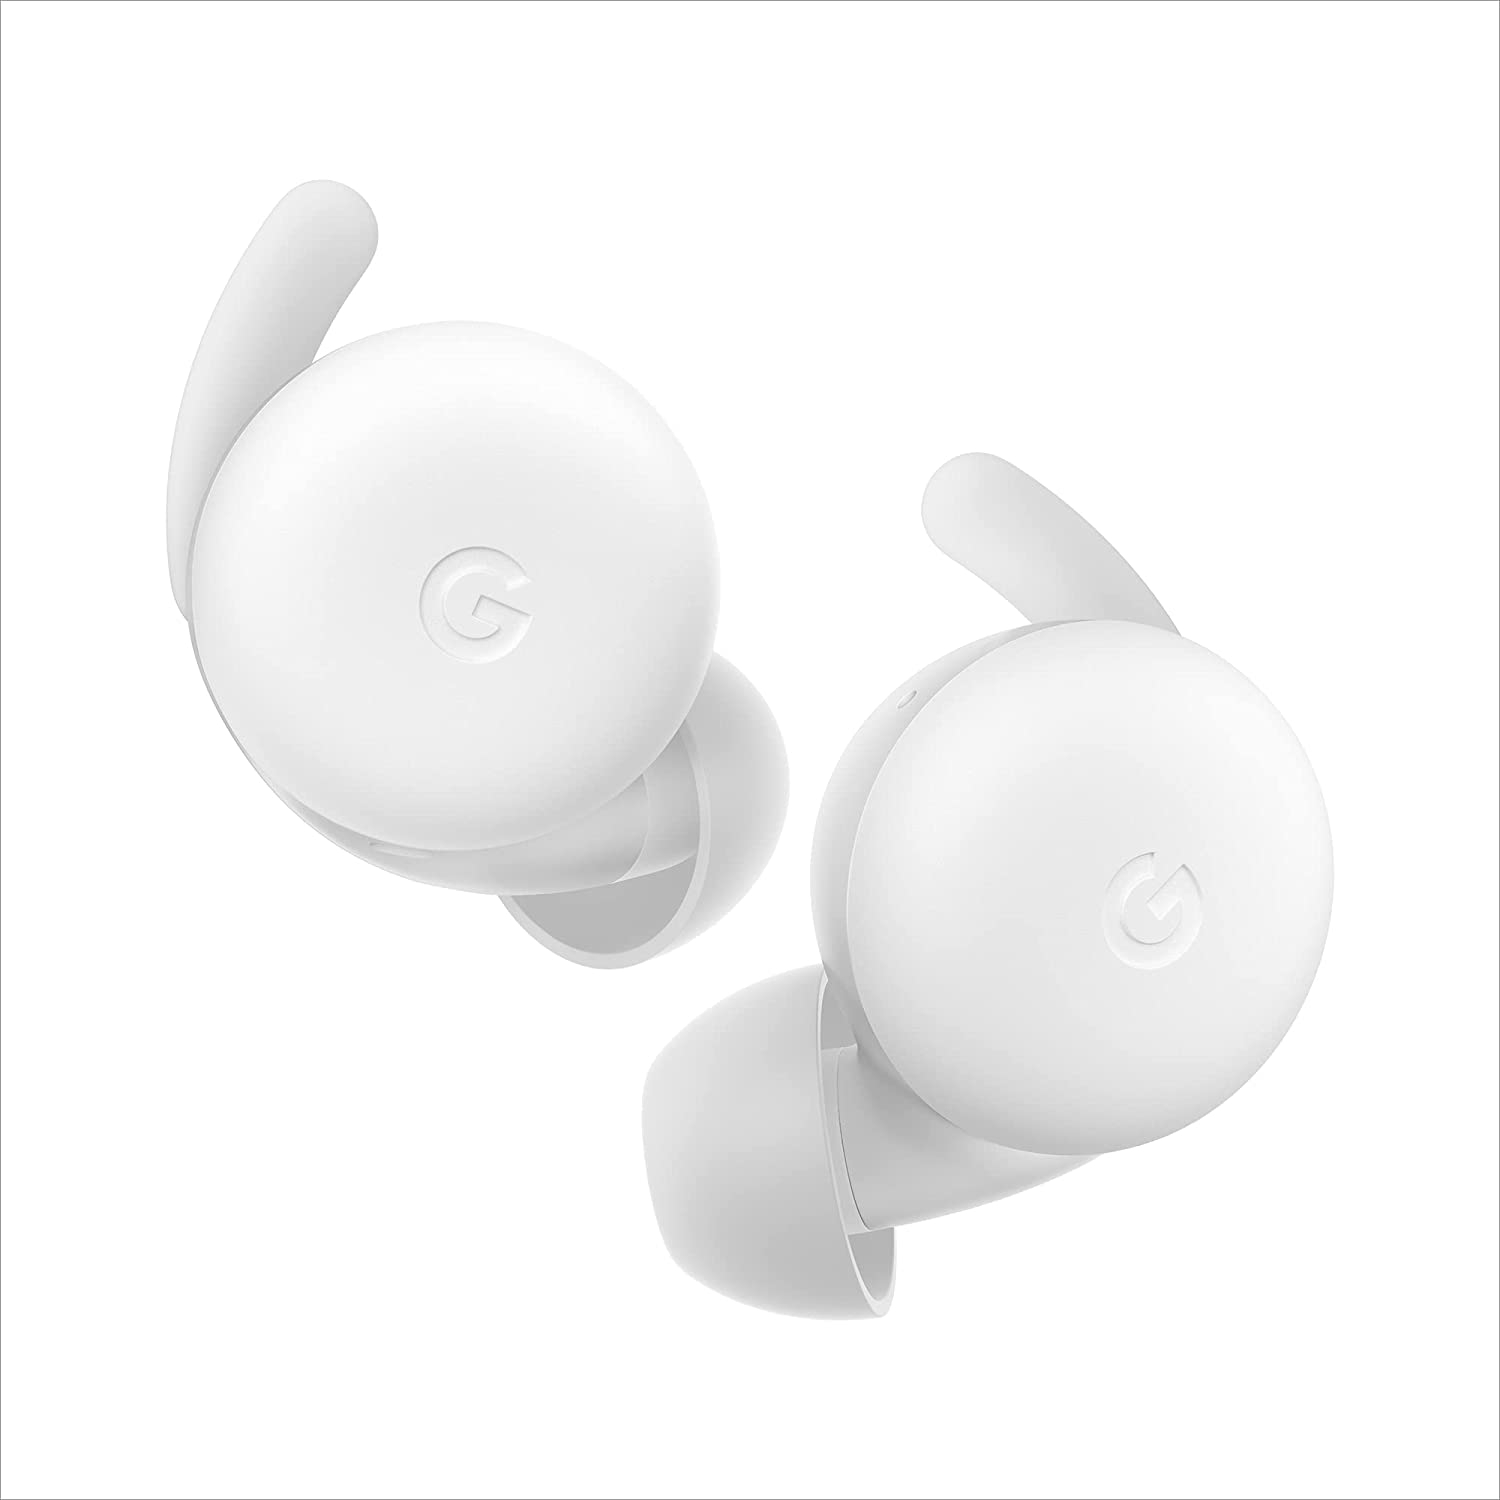 Google Pixel Buds A-Series Wireless Earbuds - White - Excellent